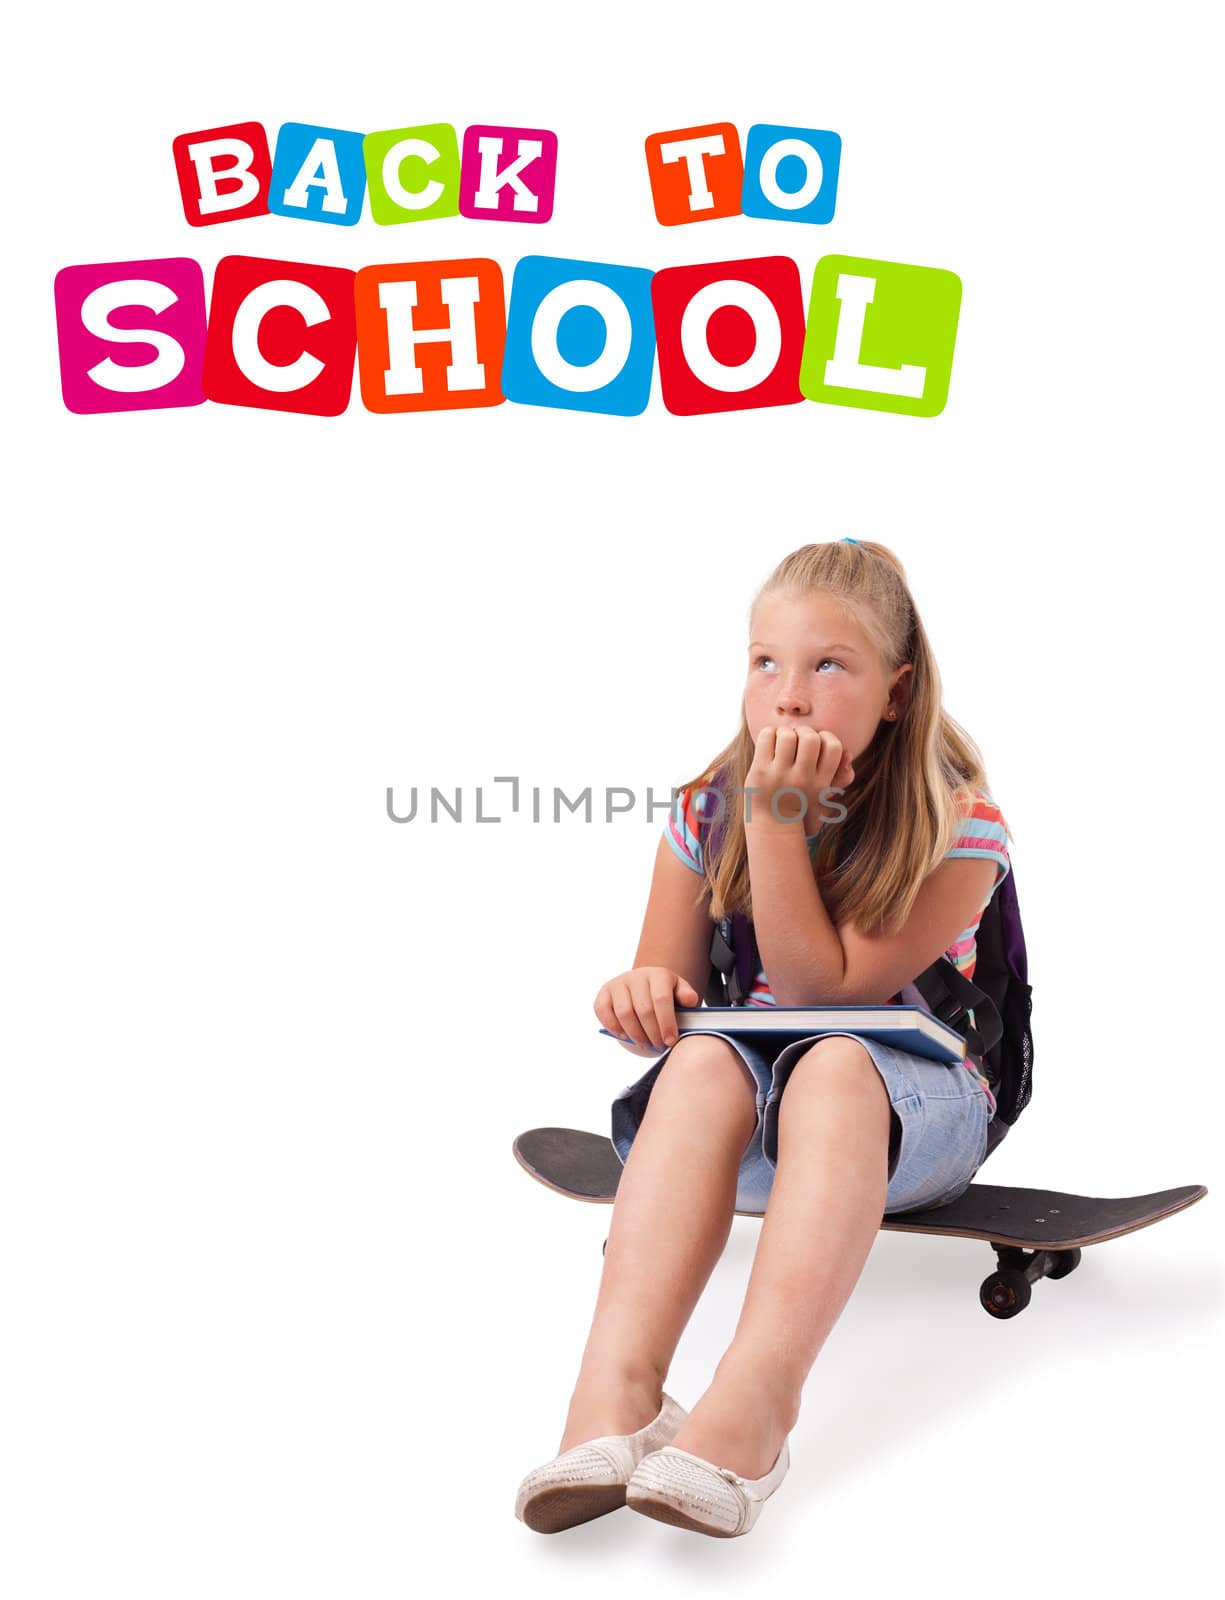 Kid on skateboard with back to school theme isolated on white